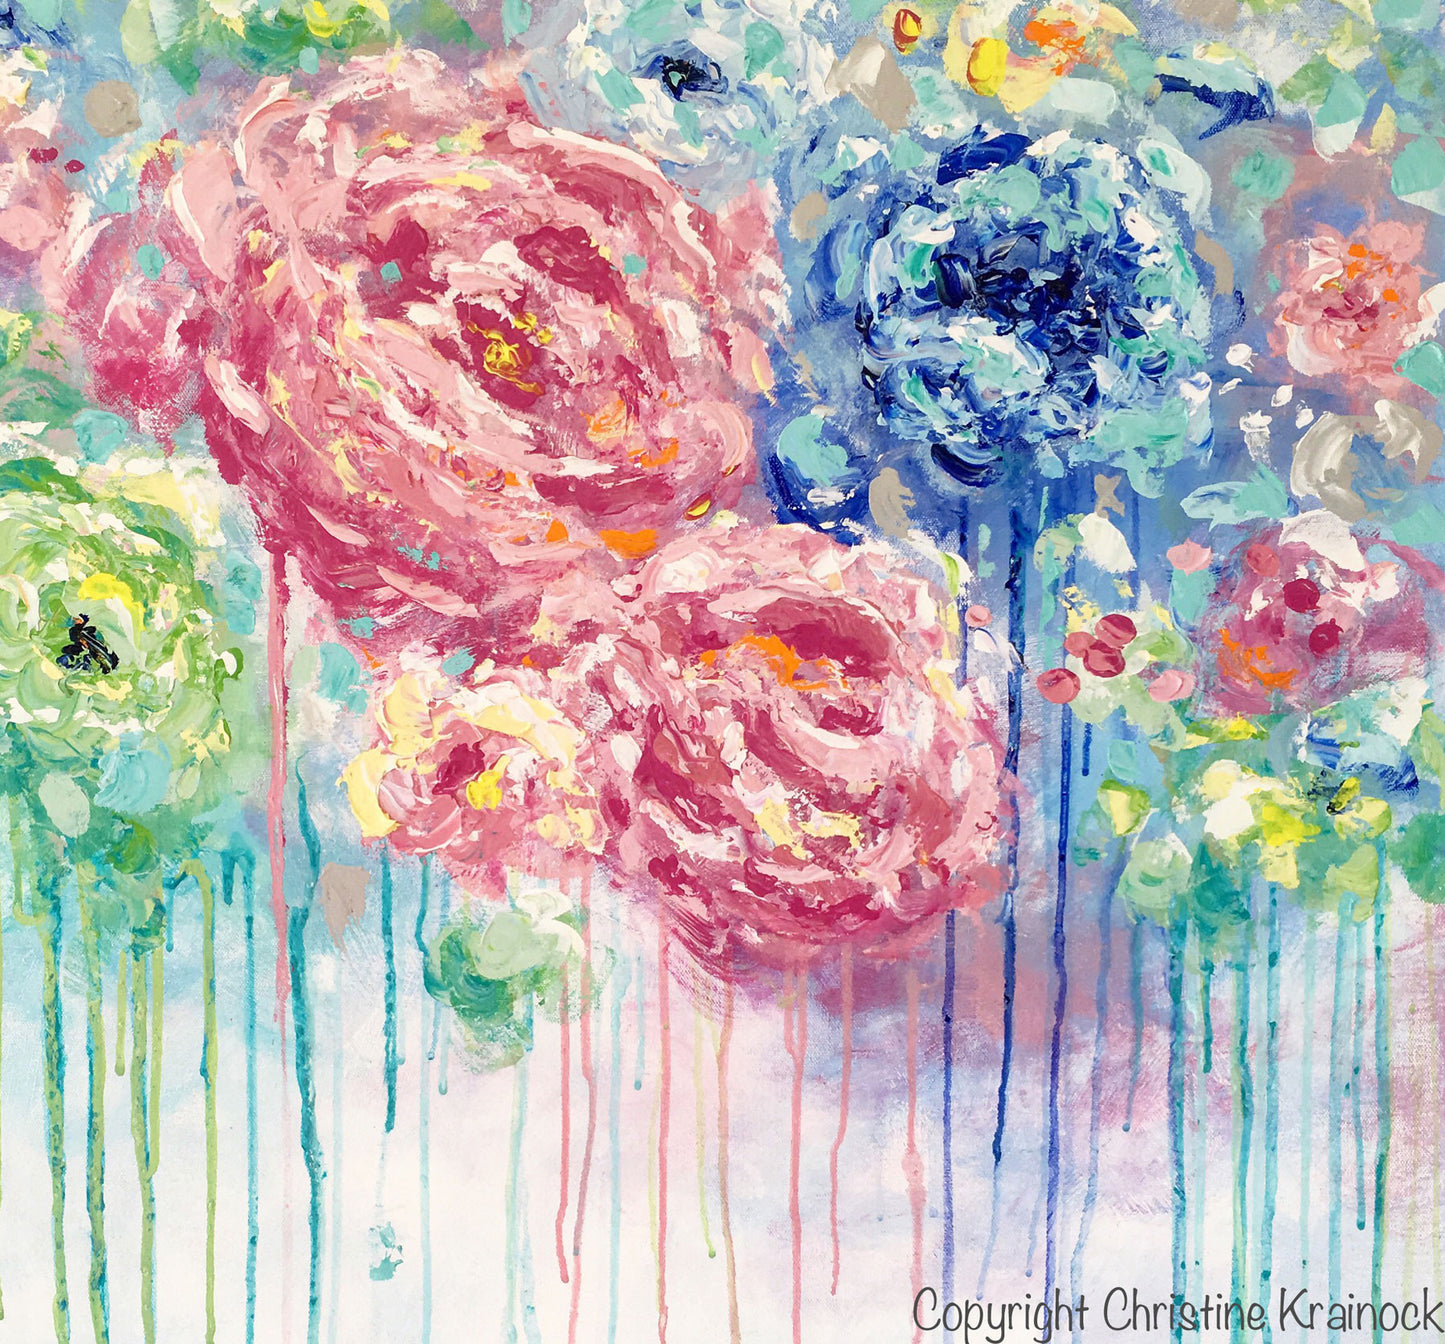 ORIGINAL Art Abstract Painting Flowers Blue White Pink Floral Textured XL Wall Art Colorful Peonies - Christine Krainock Art - Contemporary Art by Christine - 5